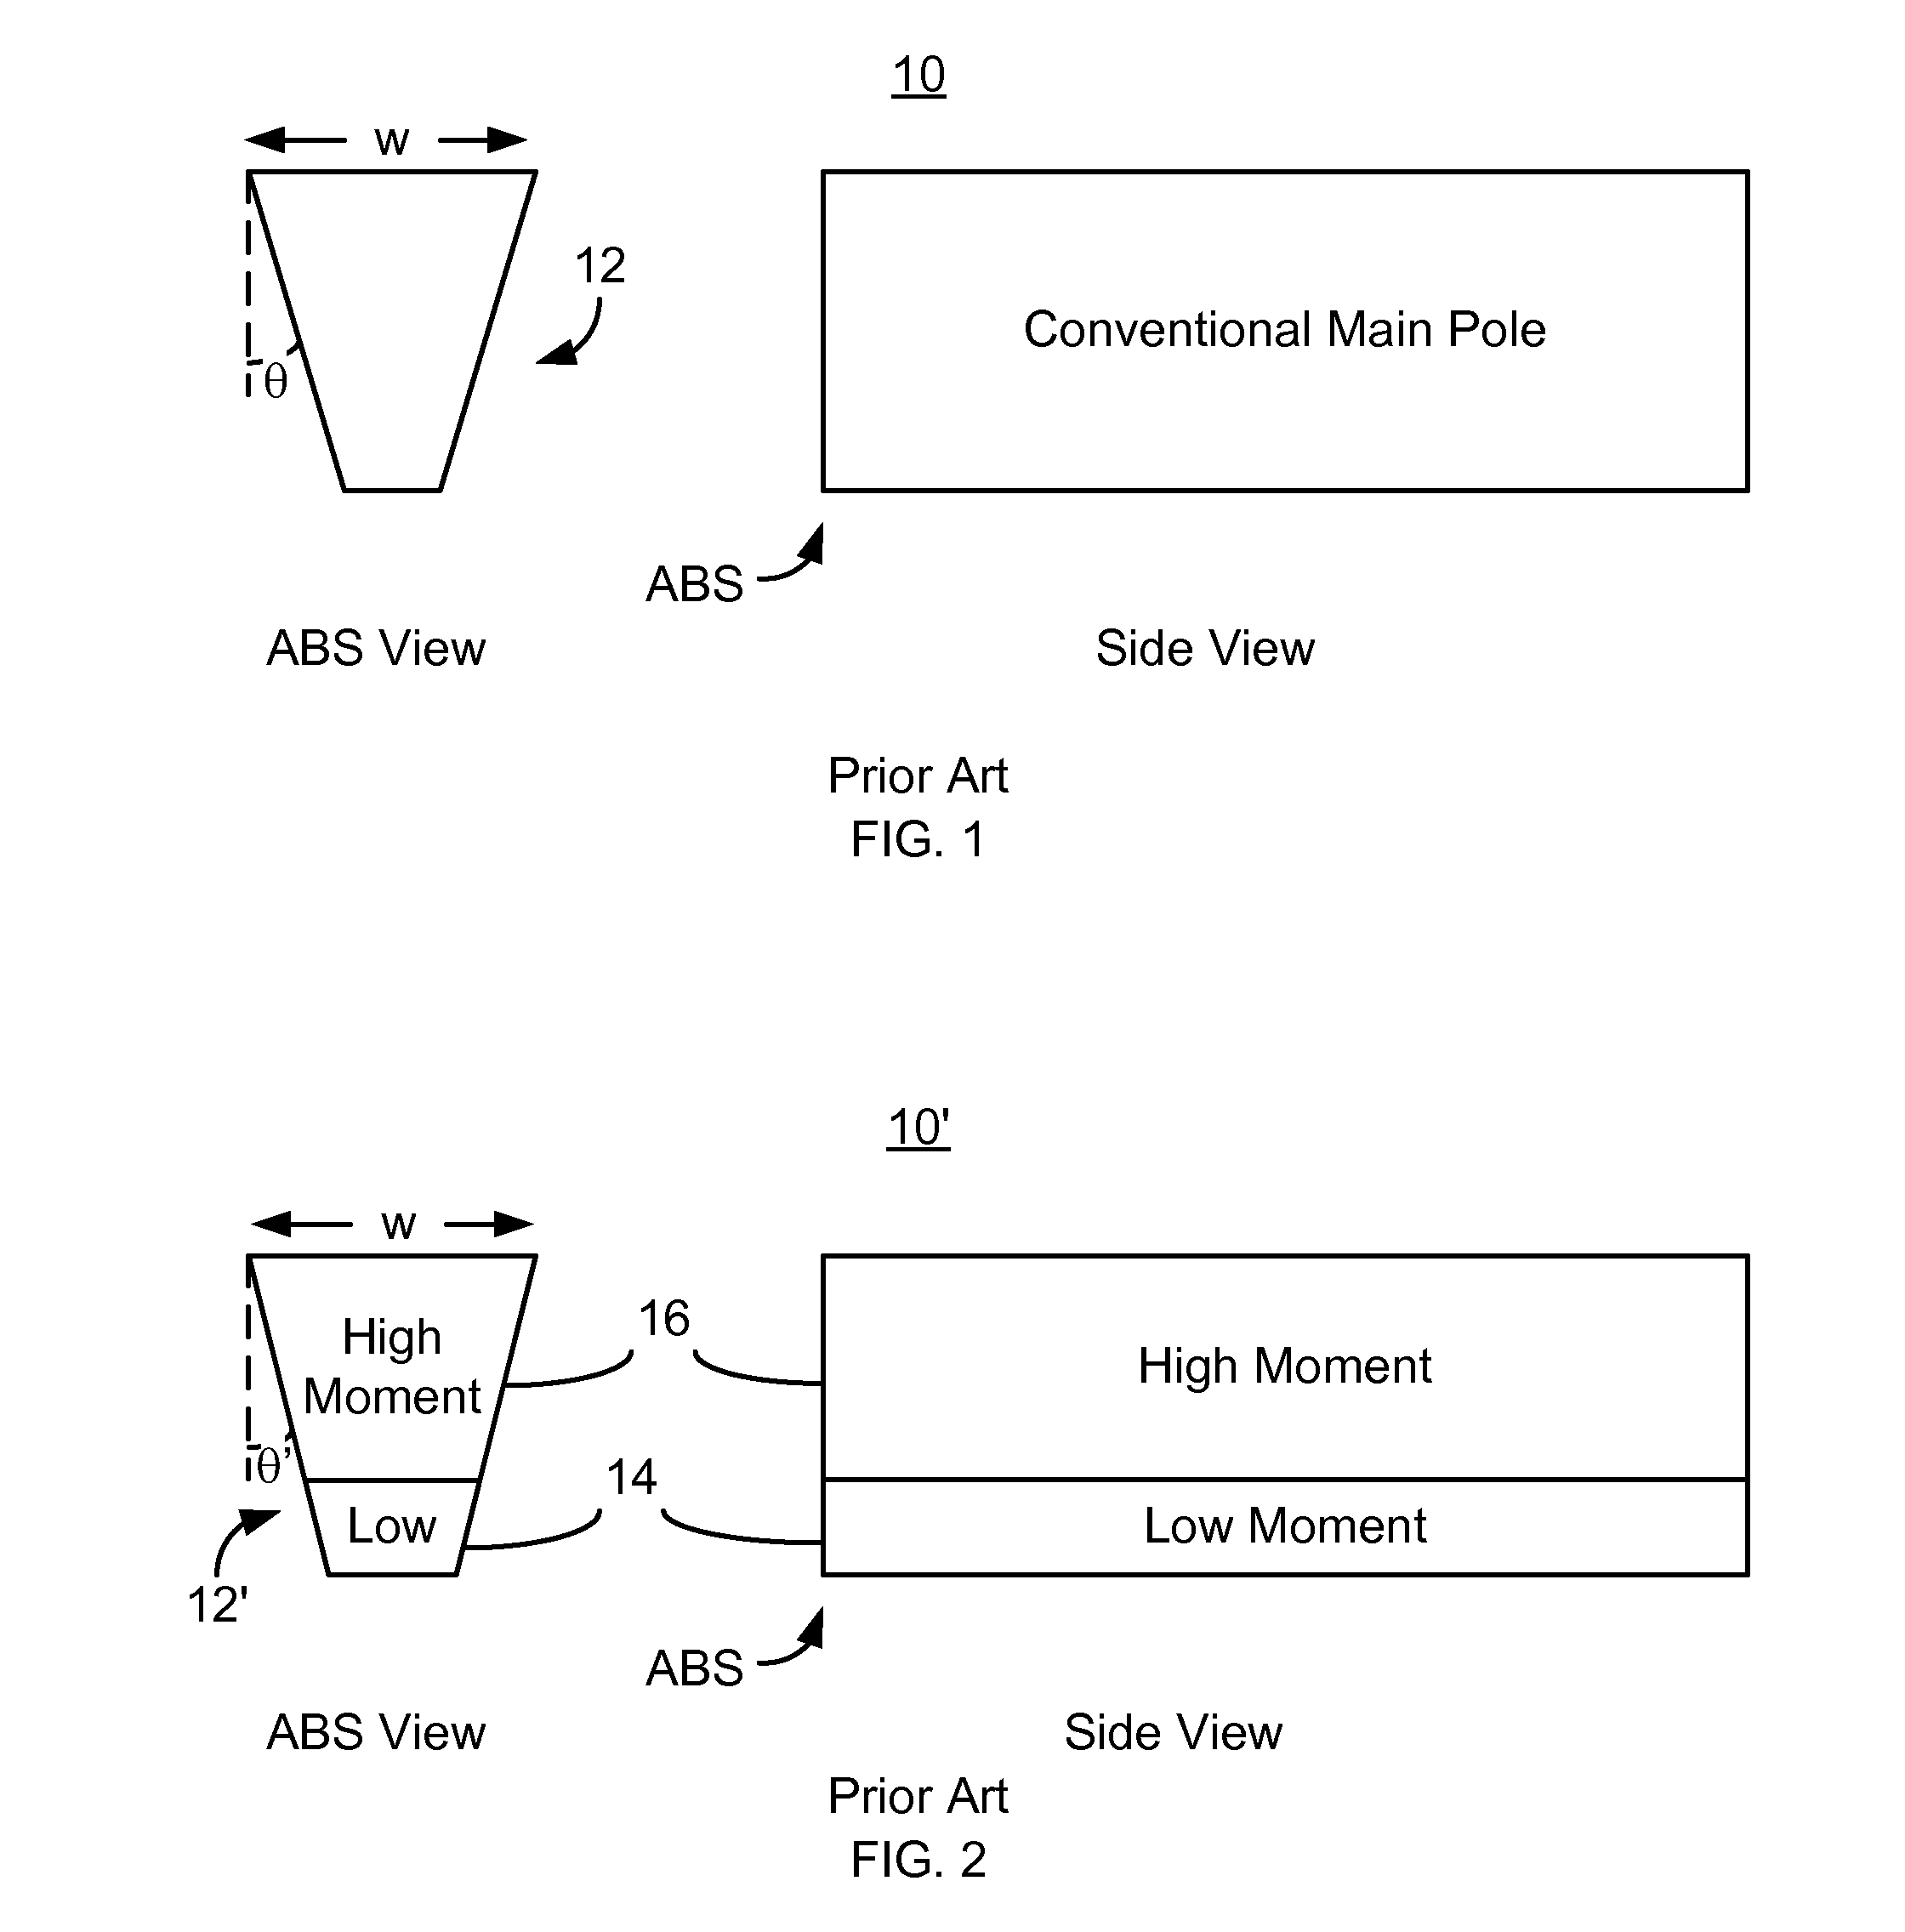 Method and system for providing a magnetic recording transducer having a hybrid moment pole